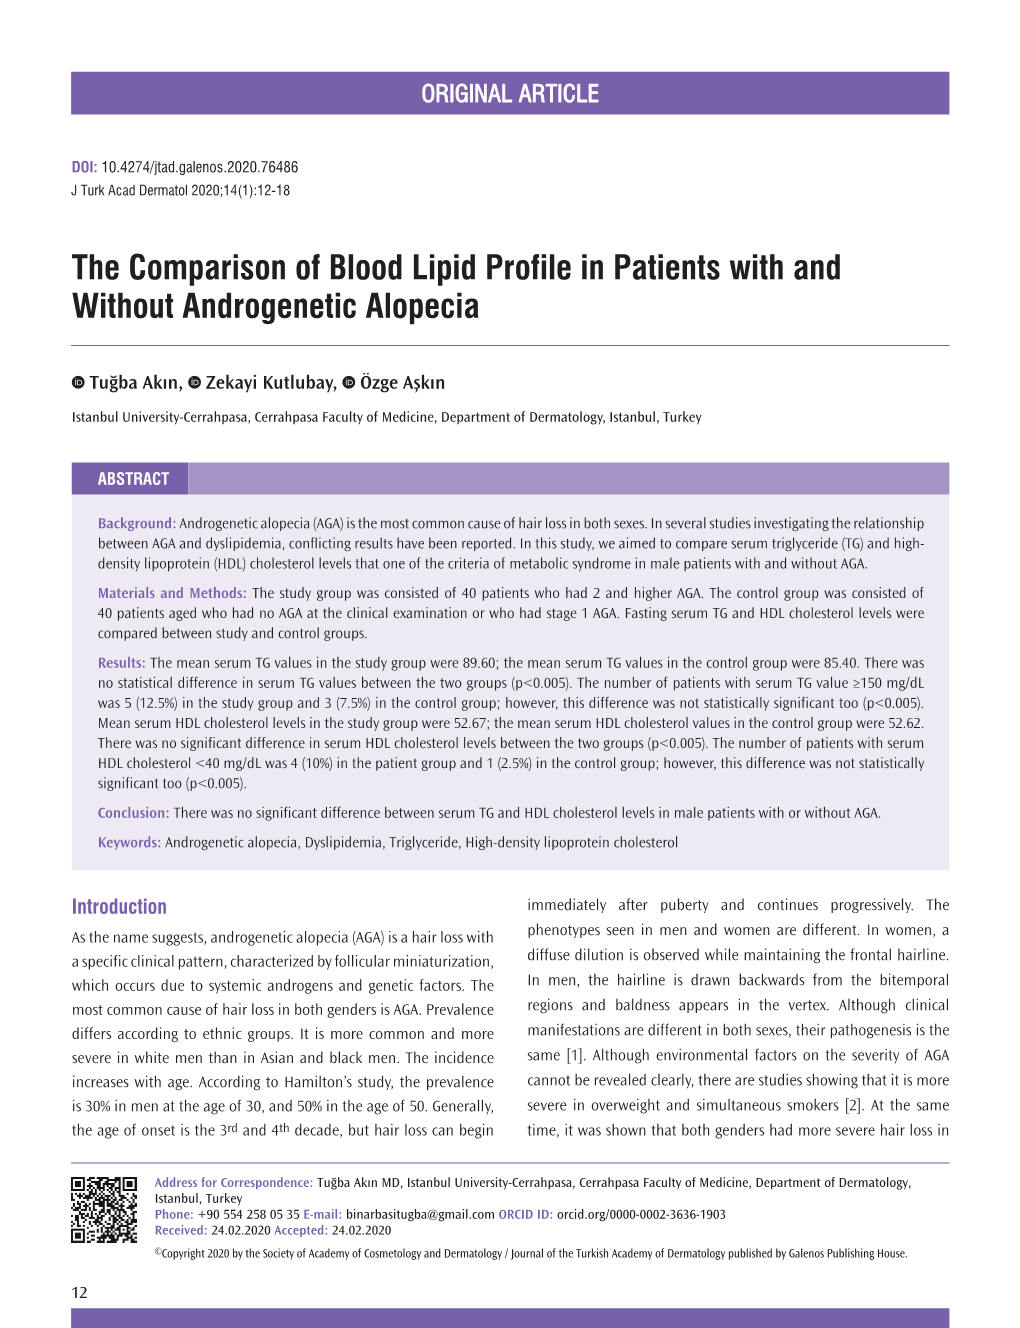 The Comparison of Blood Lipid Profile in Patients with and Without Androgenetic Alopecia